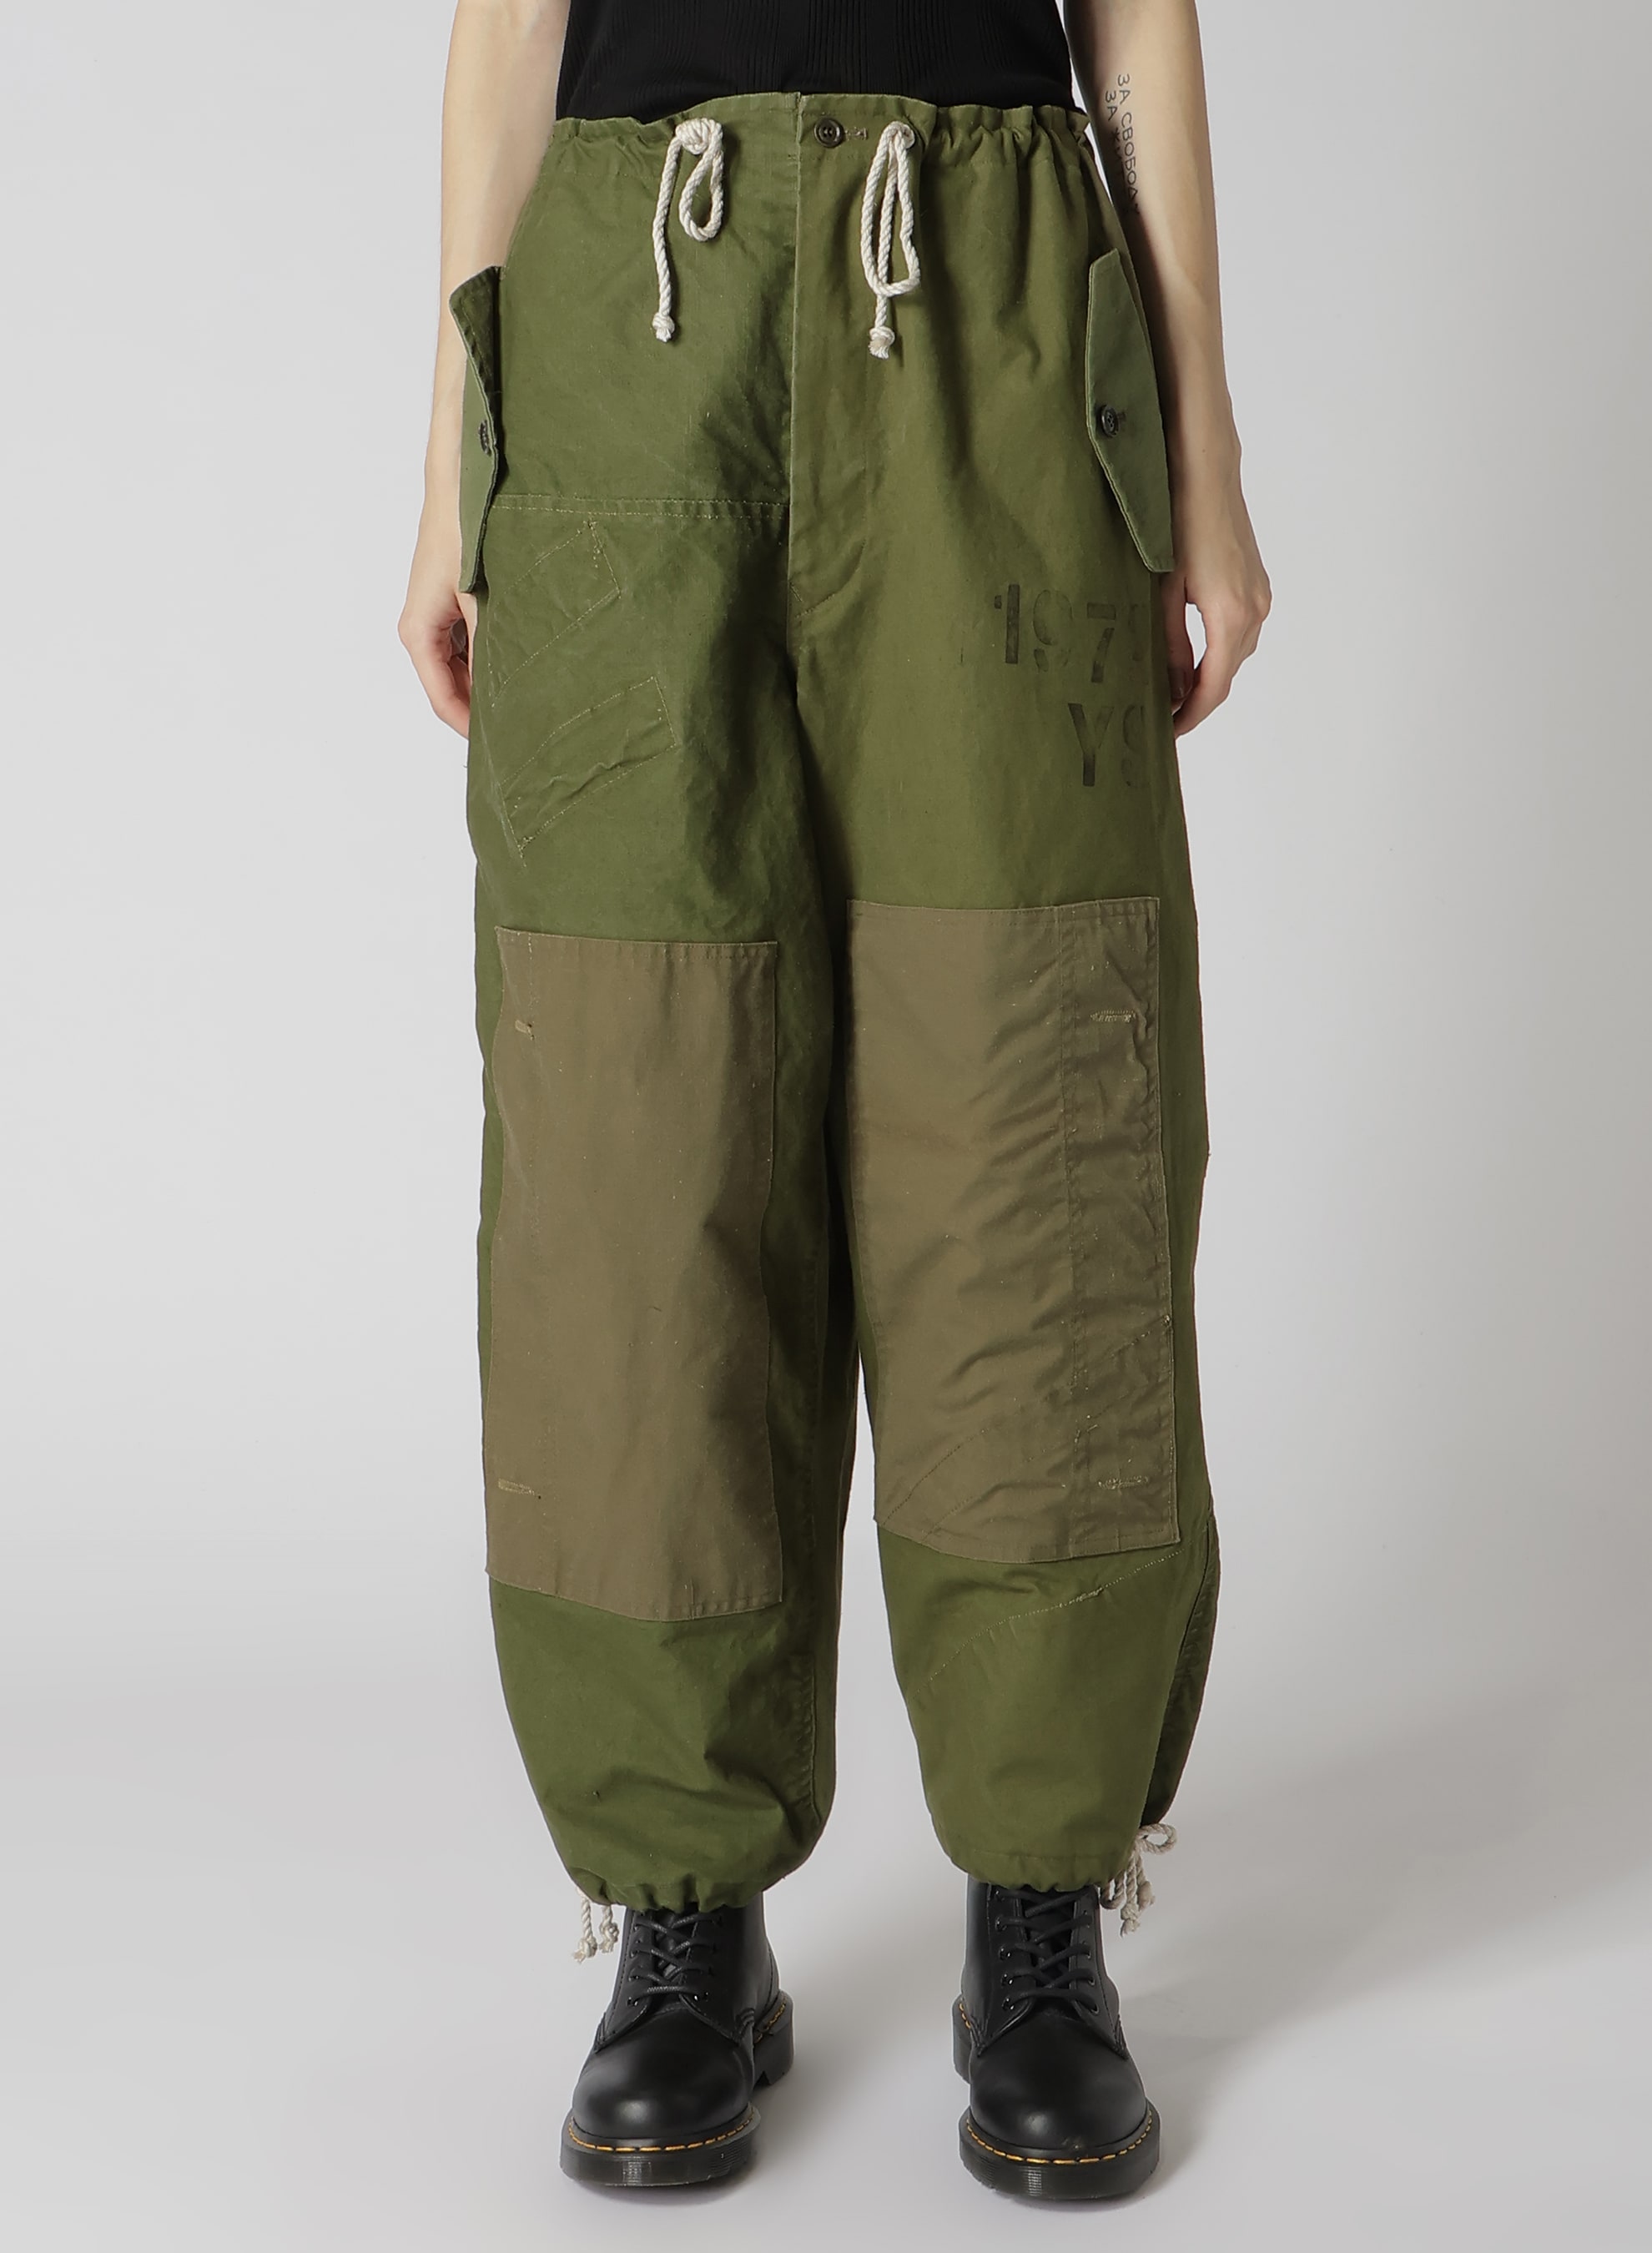 MILITARY TENT CLOTH FOUR POCKETS PANTS